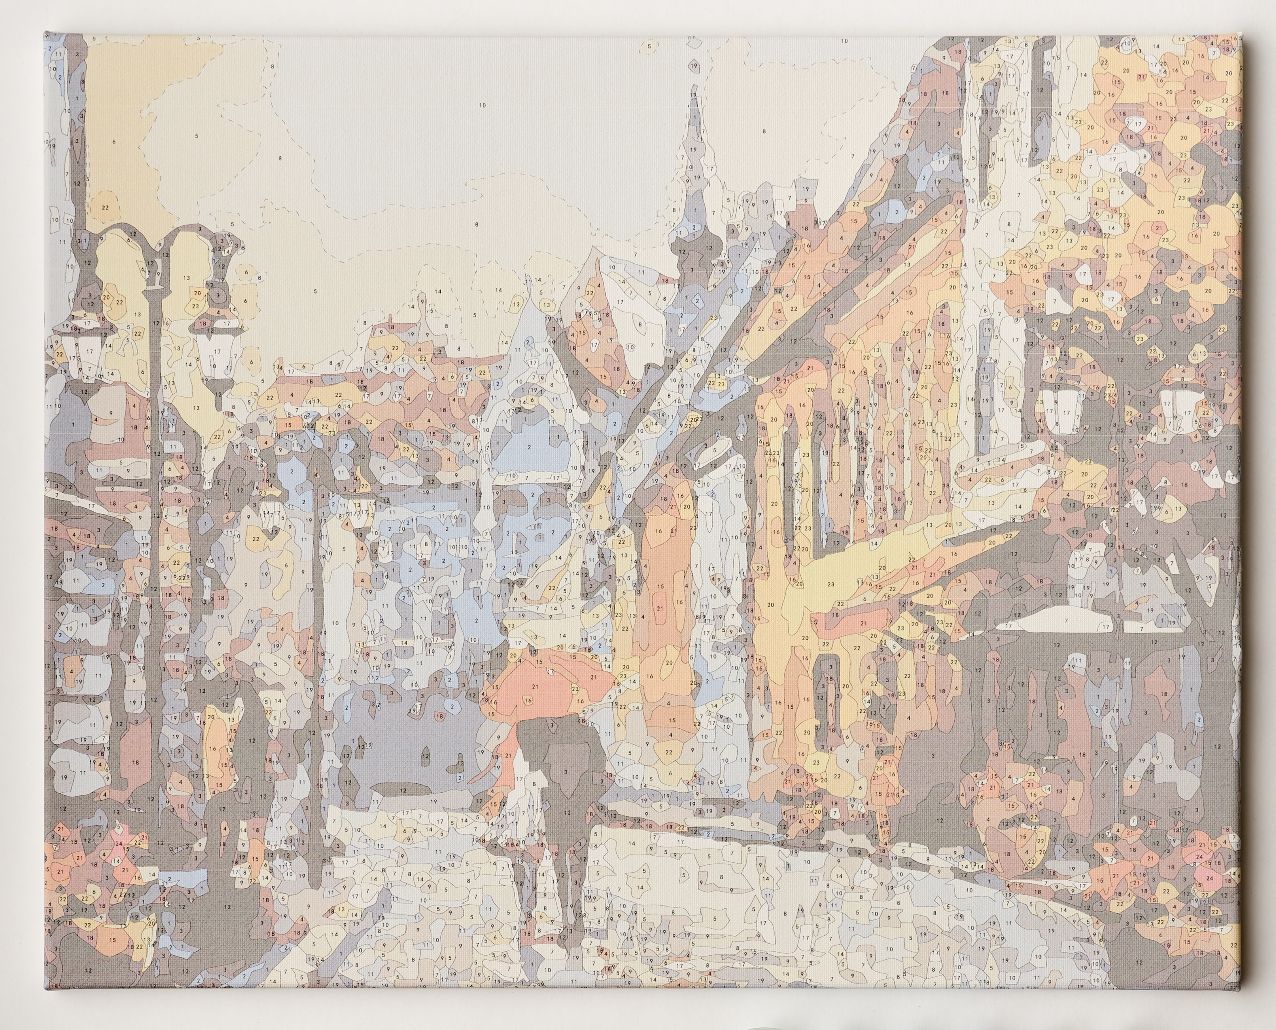 Painting by numbers - MG2159e - European Town Image 6